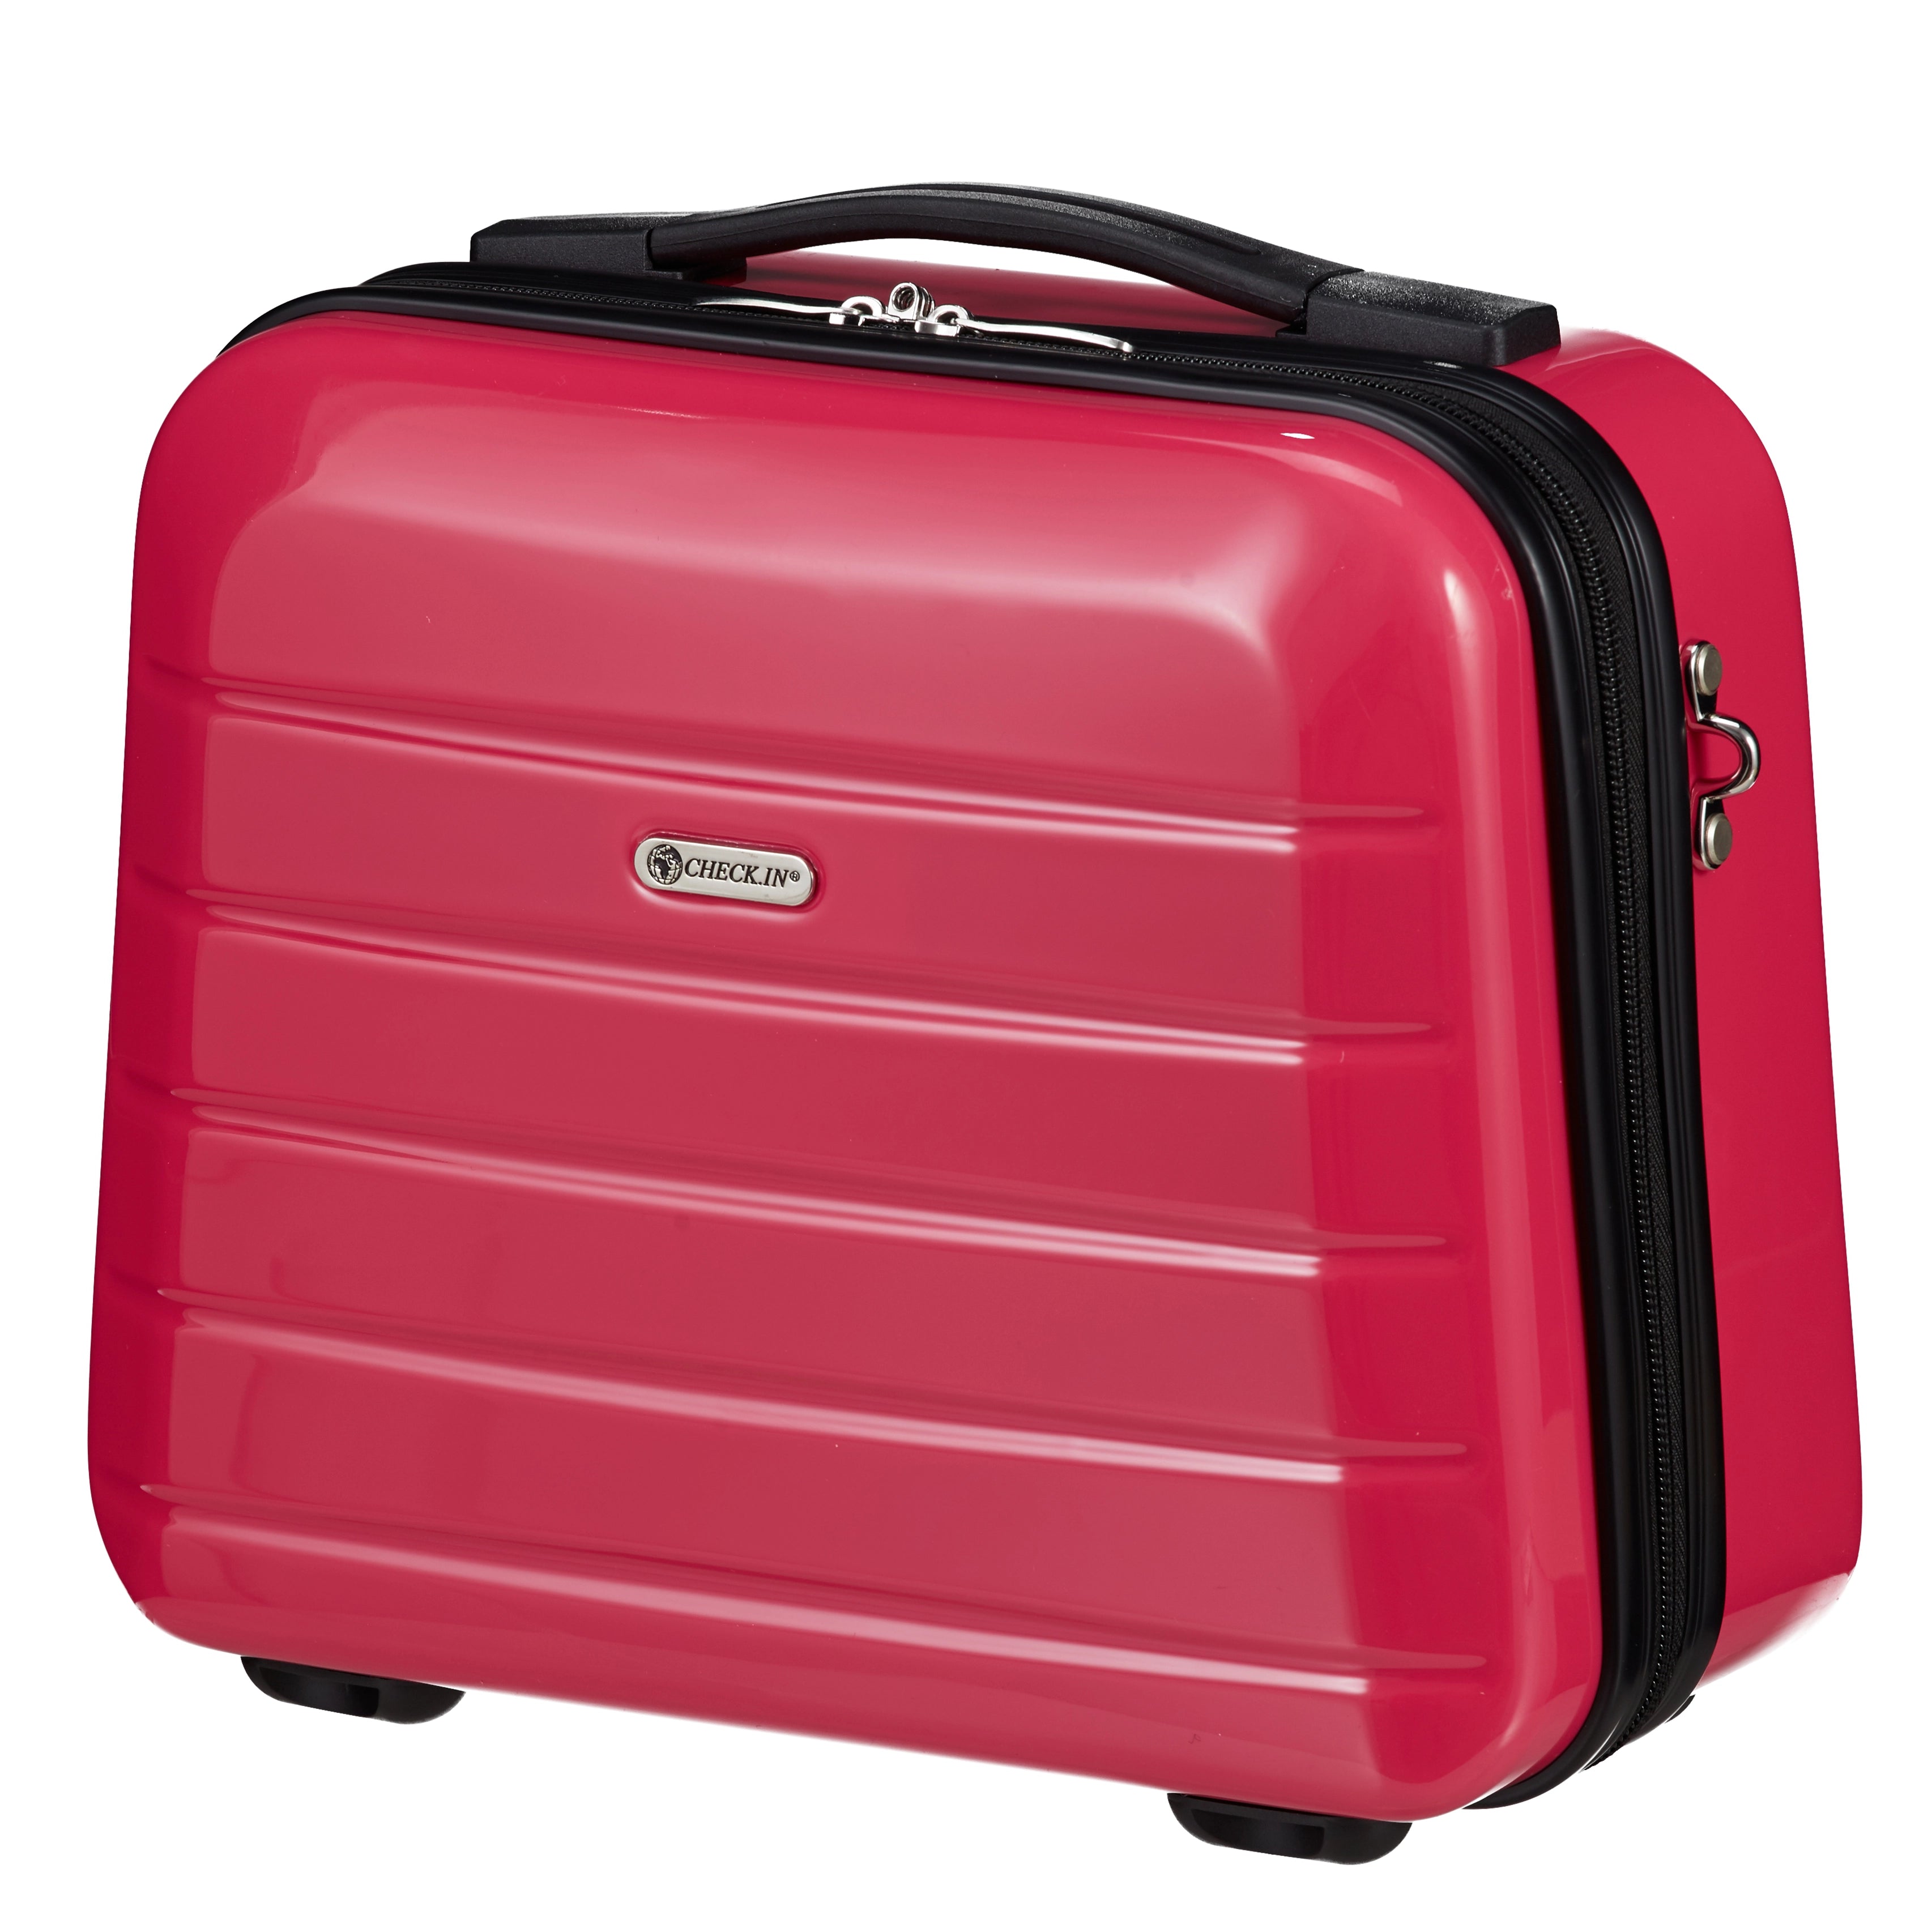 Check In London 2.0 Cosmetics case 33 cm - Pink